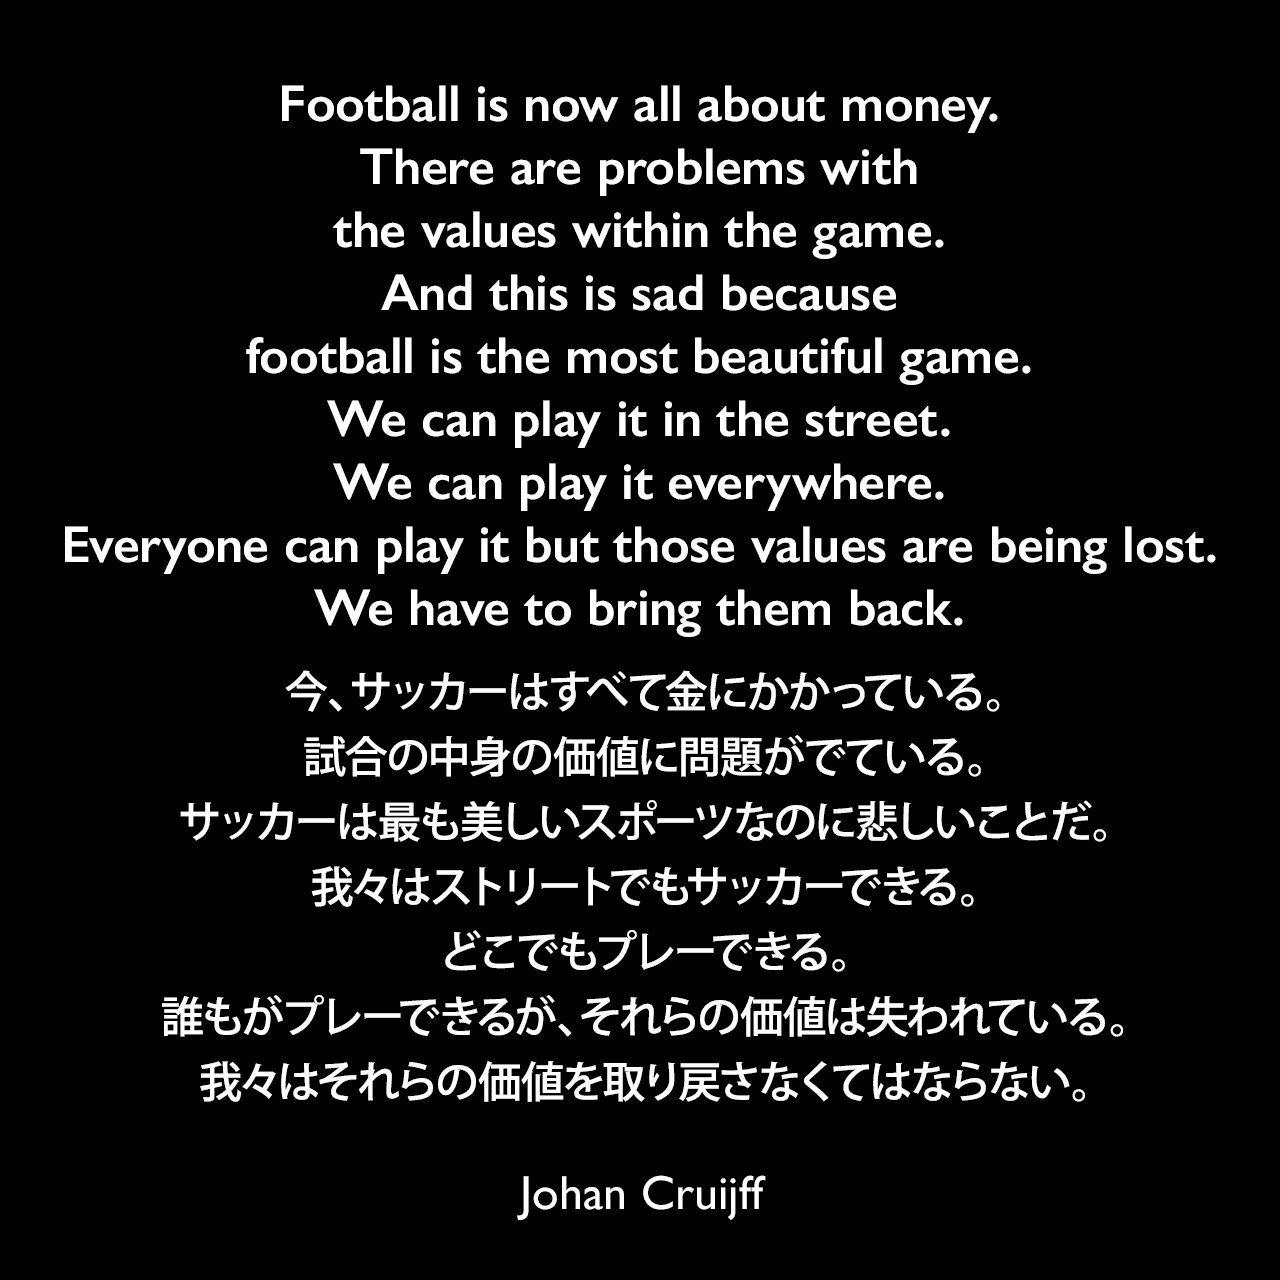 Football is now all about money. There are problems with the values within the game. And this is sad because football is the most beautiful game. We can play it in the street. We can play it everywhere. Everyone can play it but those values are being lost. We have to bring them back.今、サッカーはすべて金にかかっている。試合の中身の価値に問題がでている。サッカーは最も美しいスポーツなのに悲しいことだ。我々はストリートでもサッカーできる。どこでもプレーできる。誰もがプレーできるが、それらの価値は失われている。我々はそれらの価値を取り戻さなくてはならない。- 2014年9月 The Guardian紙のインタビューよりJohan Cruijff